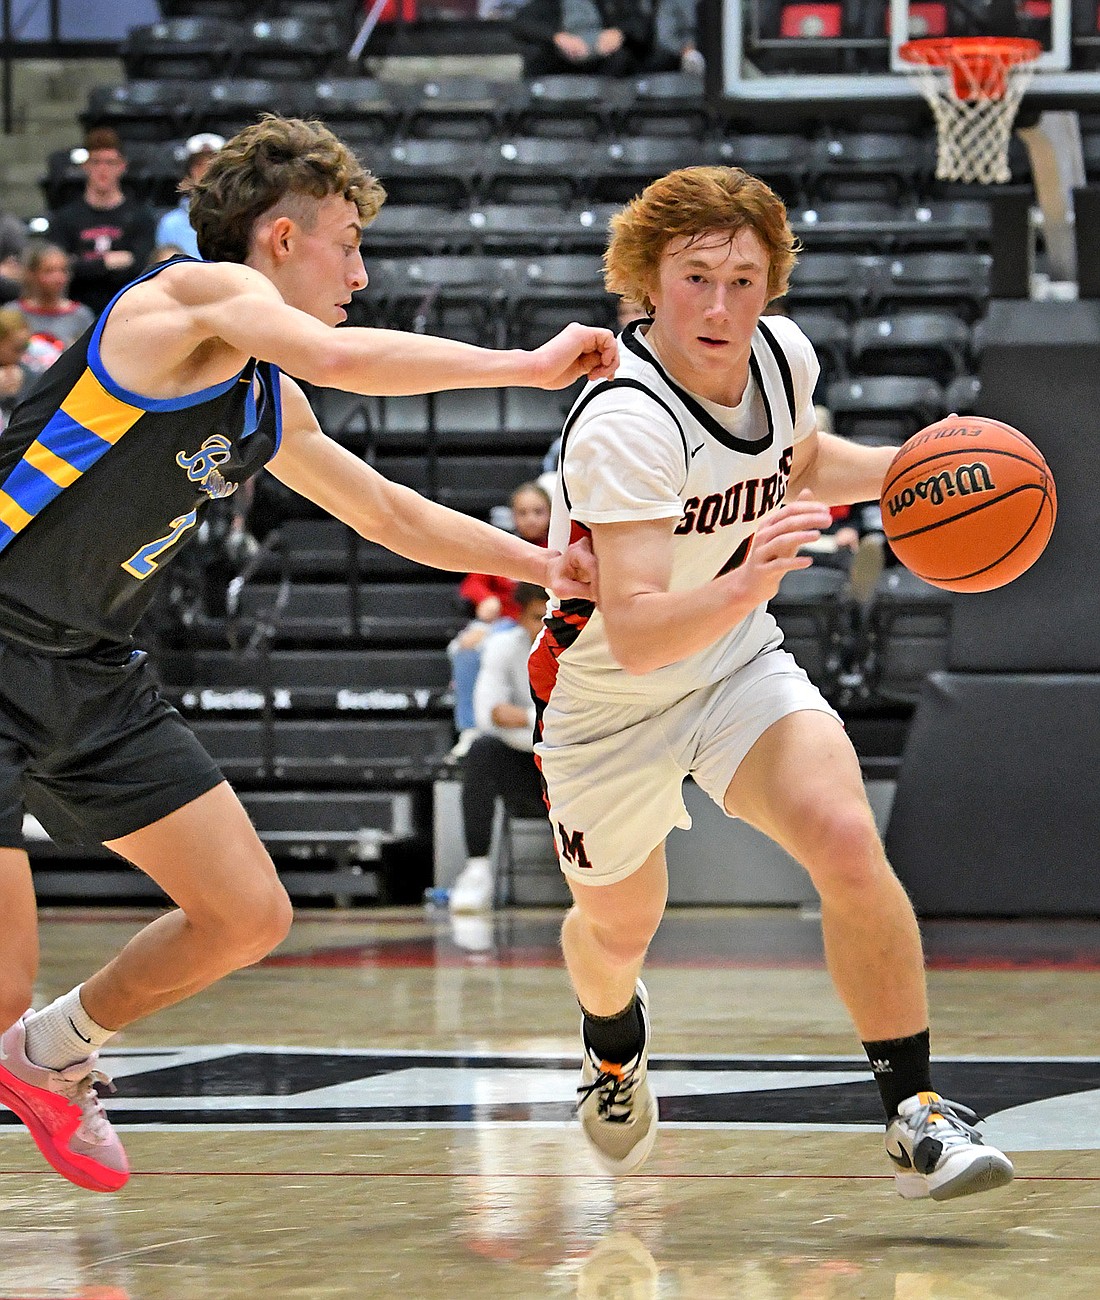 Manchester senior Tyler McLain races into the forecourt during the second quarter of Saturday night's game against Blackhawk Christian. Photo by Gary Nieter